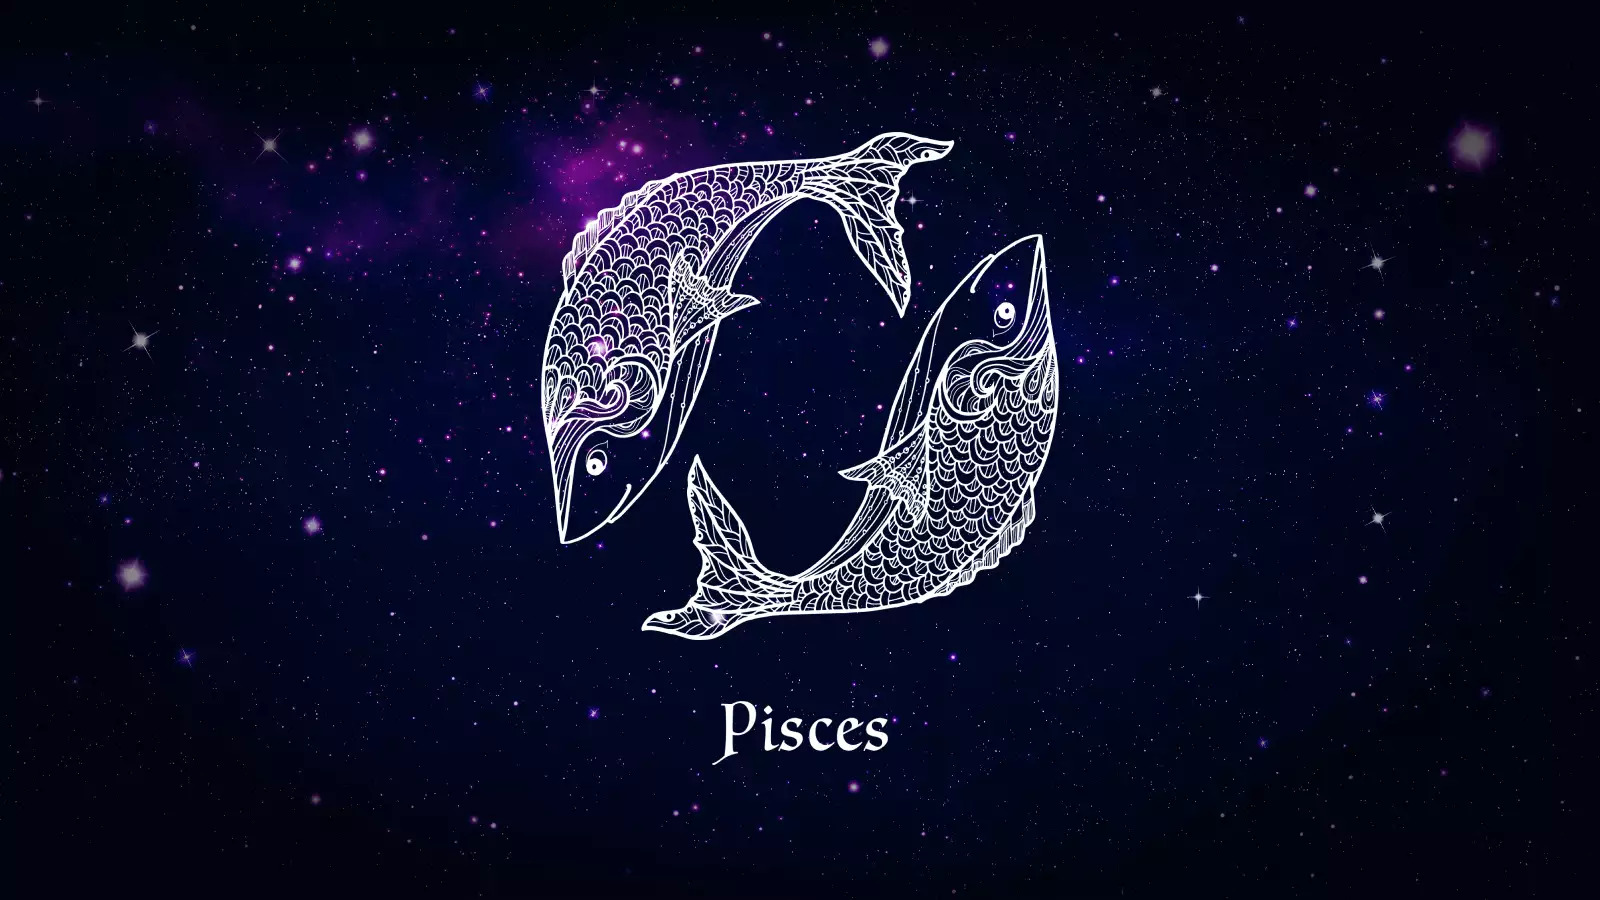 11 Fun Facts About Pisces - Facts.net